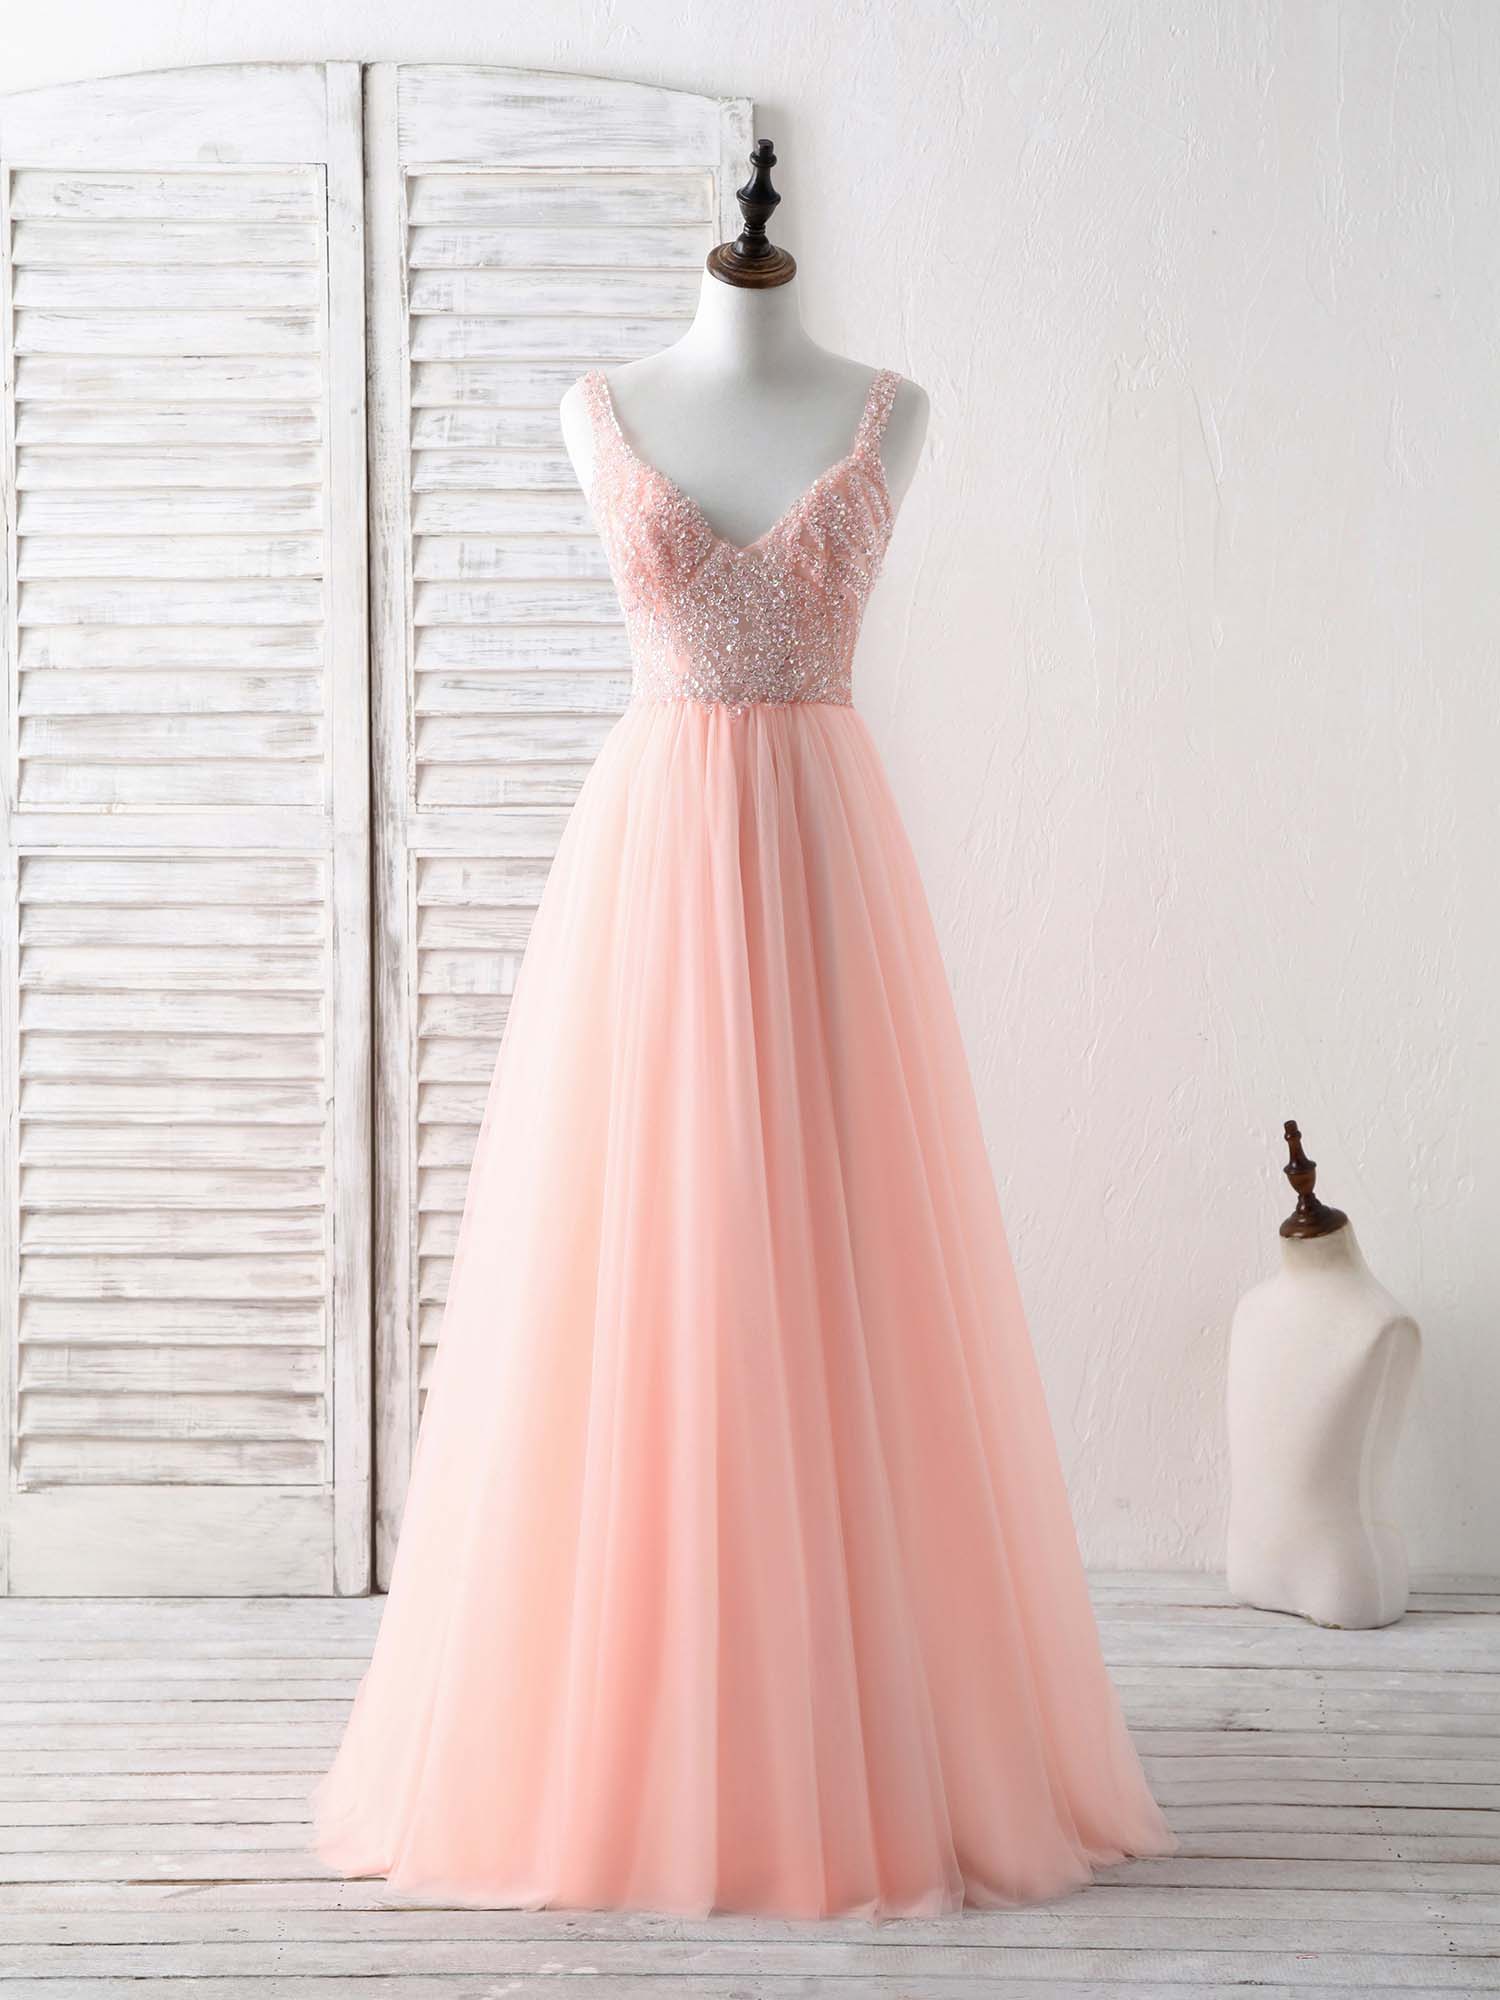 Unique Tulle Beads Long Corset Prom Dress, Tulle Evening Dress outfit, Bridesmaids Dresses Winter